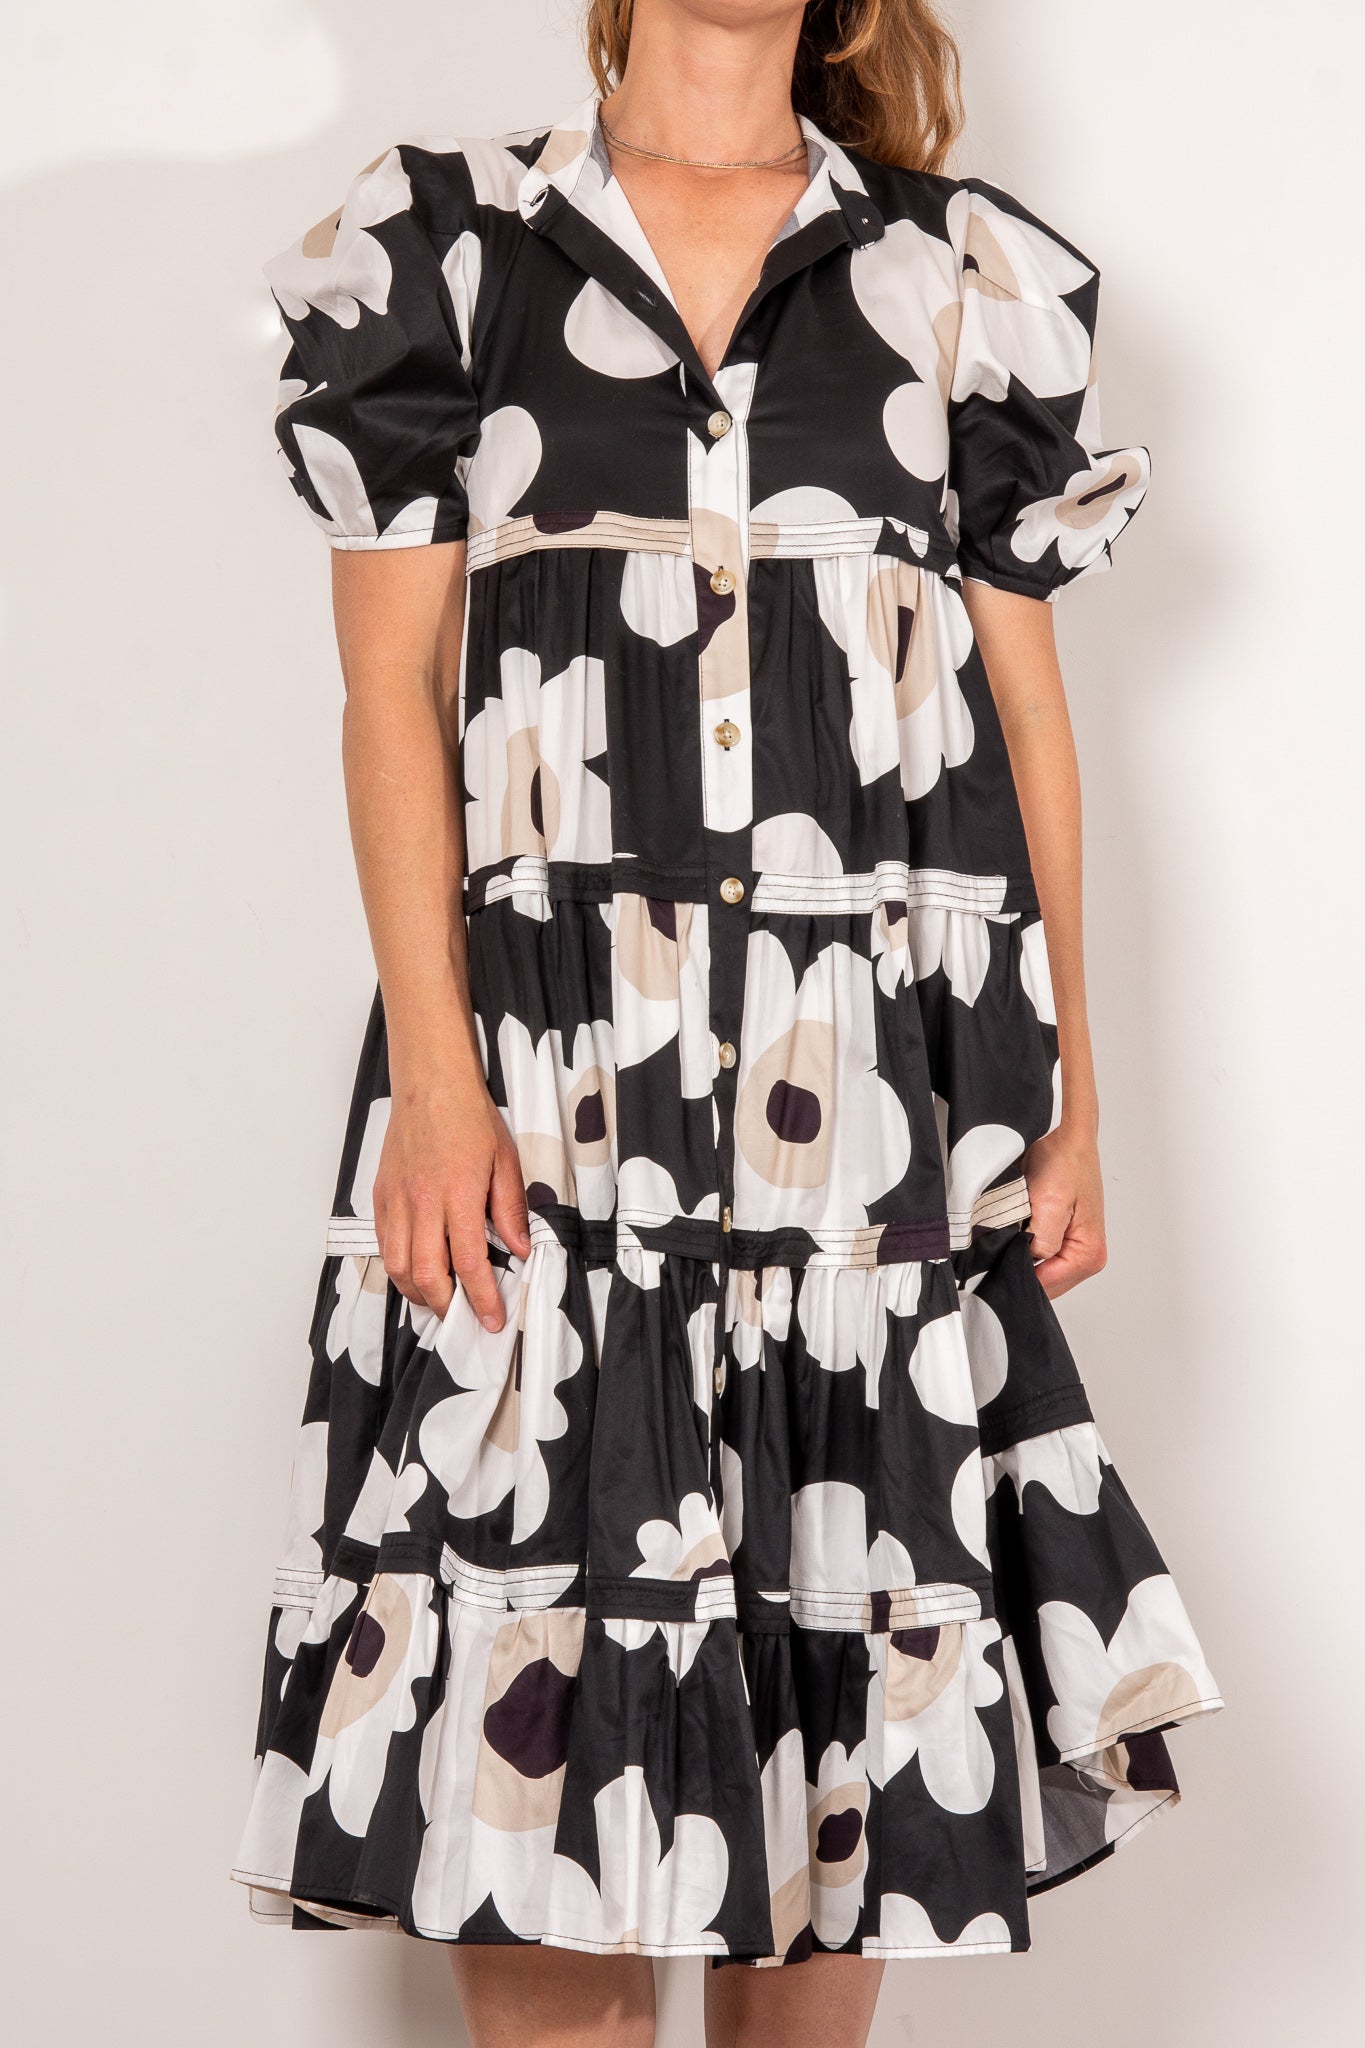 COOPER by Trelise Cooper One Two Check Dress